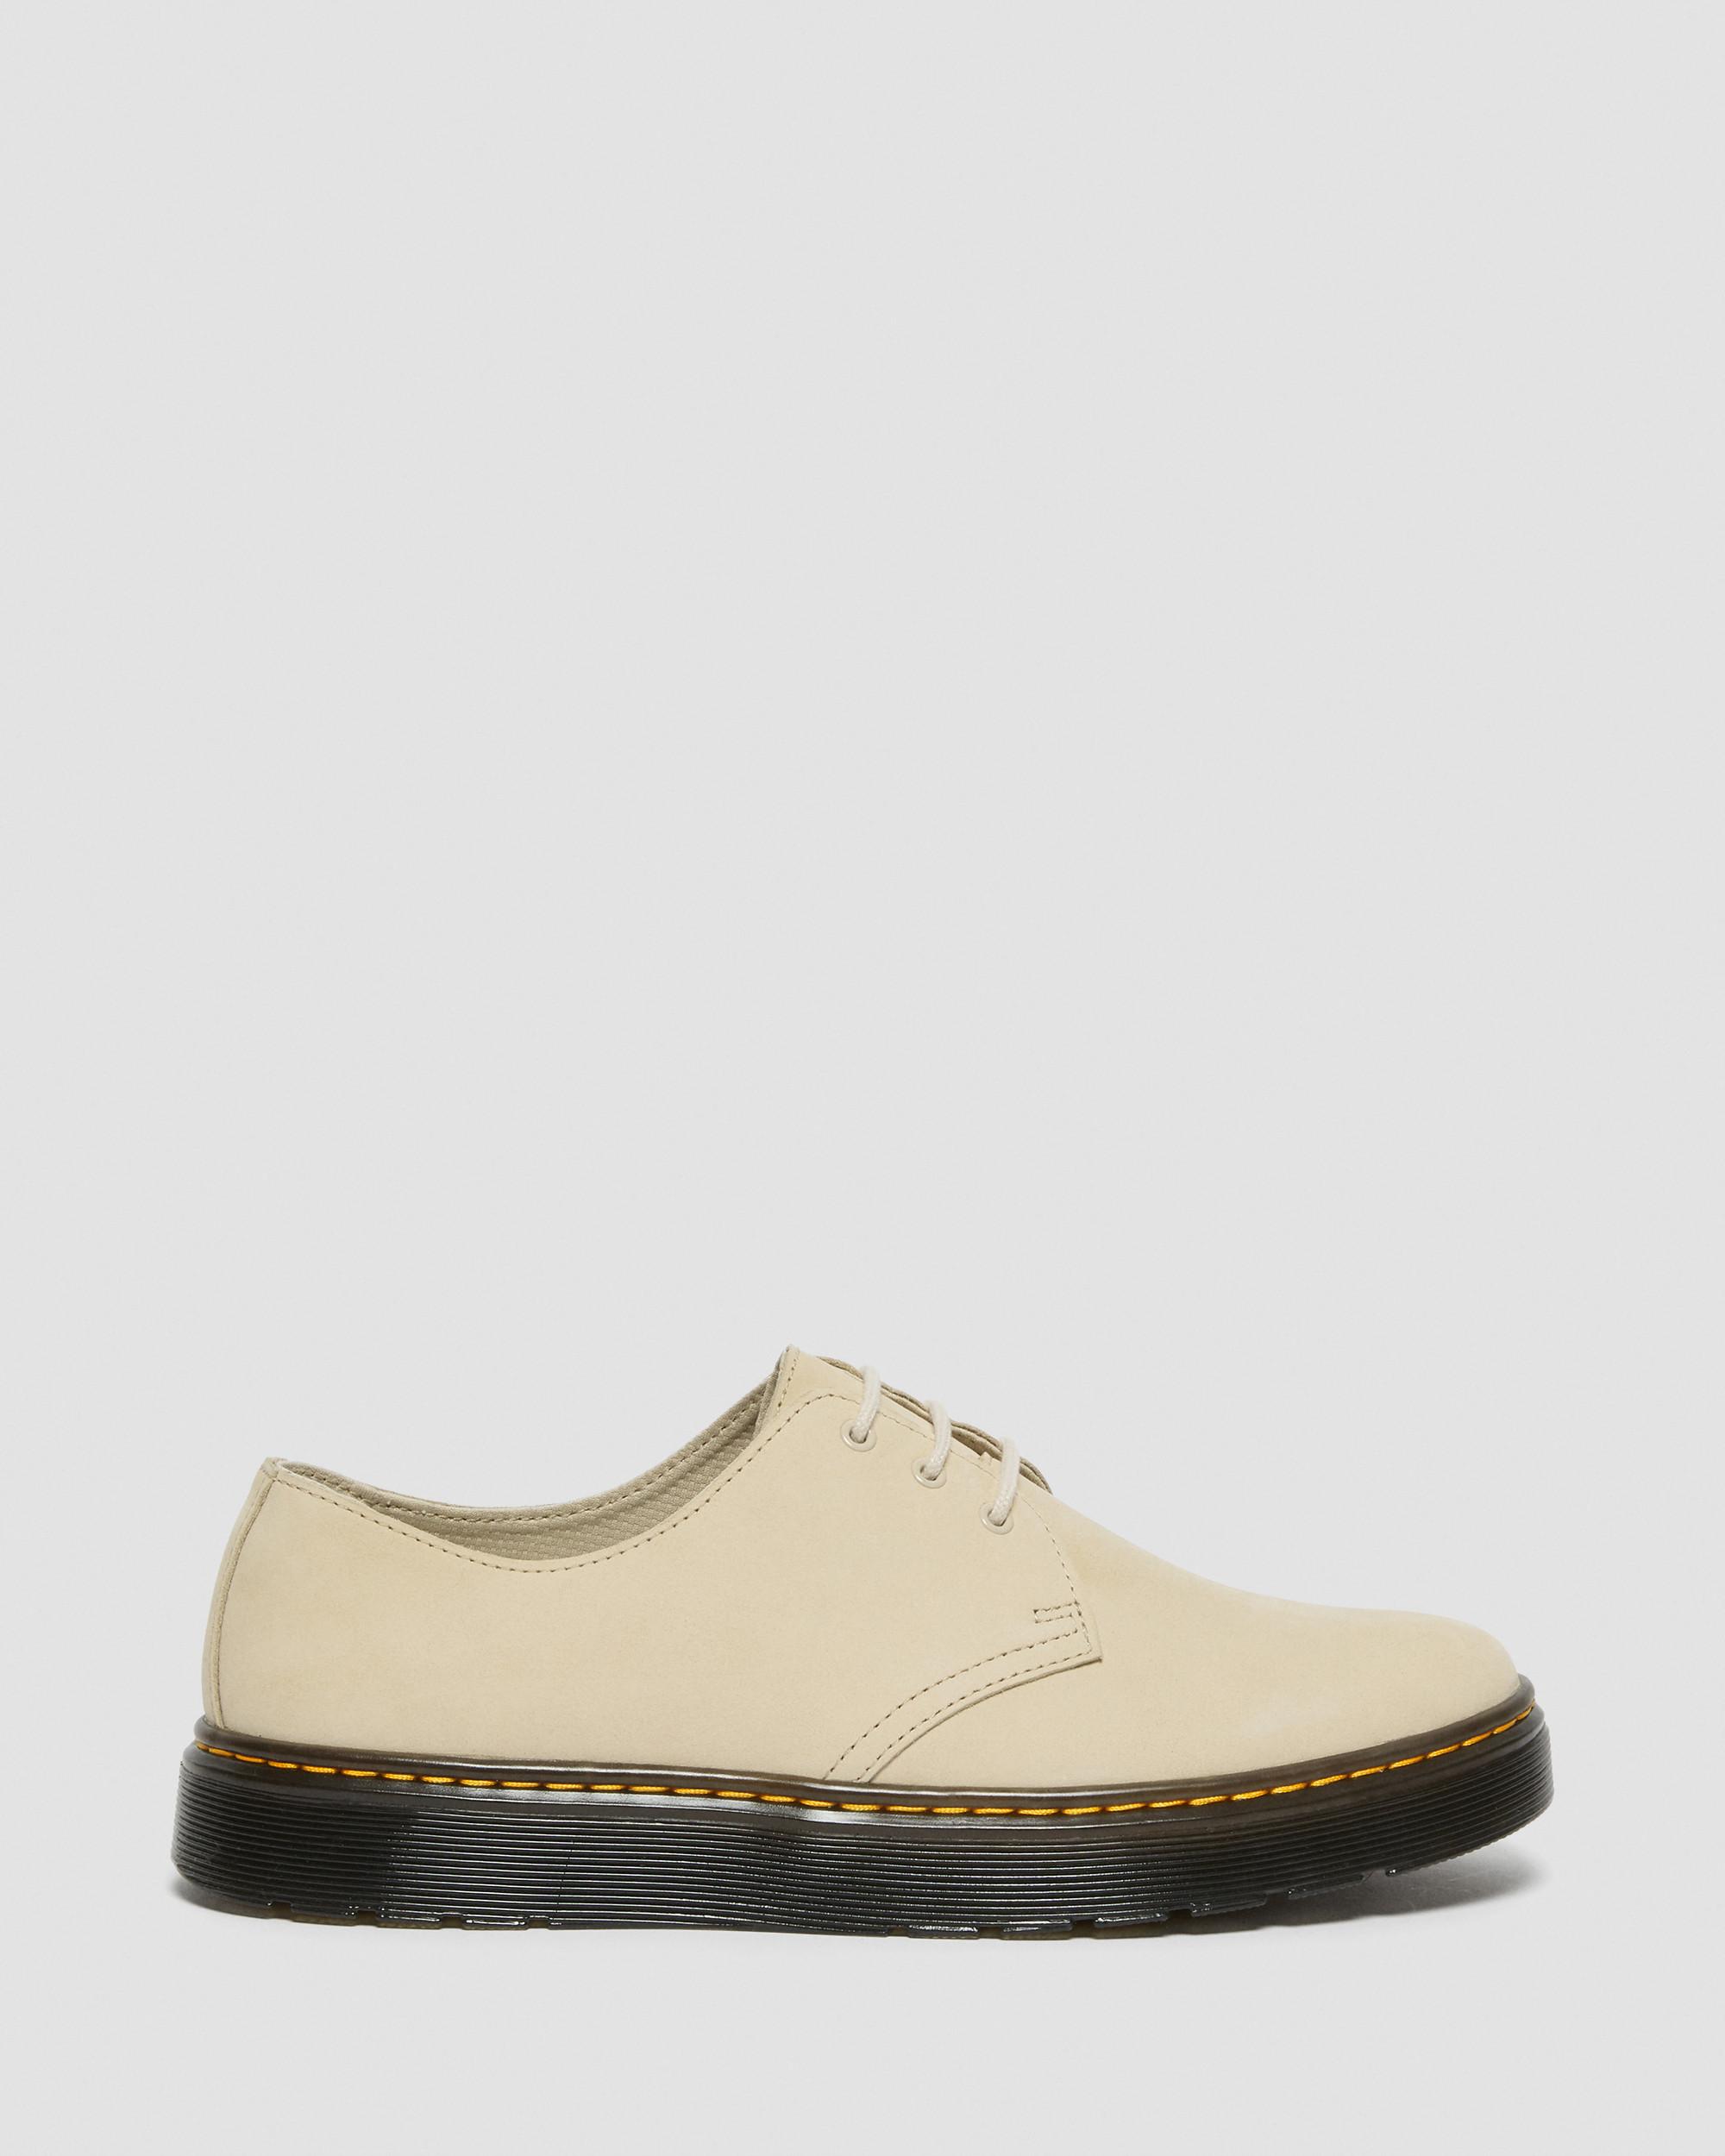 Thurston Lo Leather Shoes in Sand | Dr. Martens